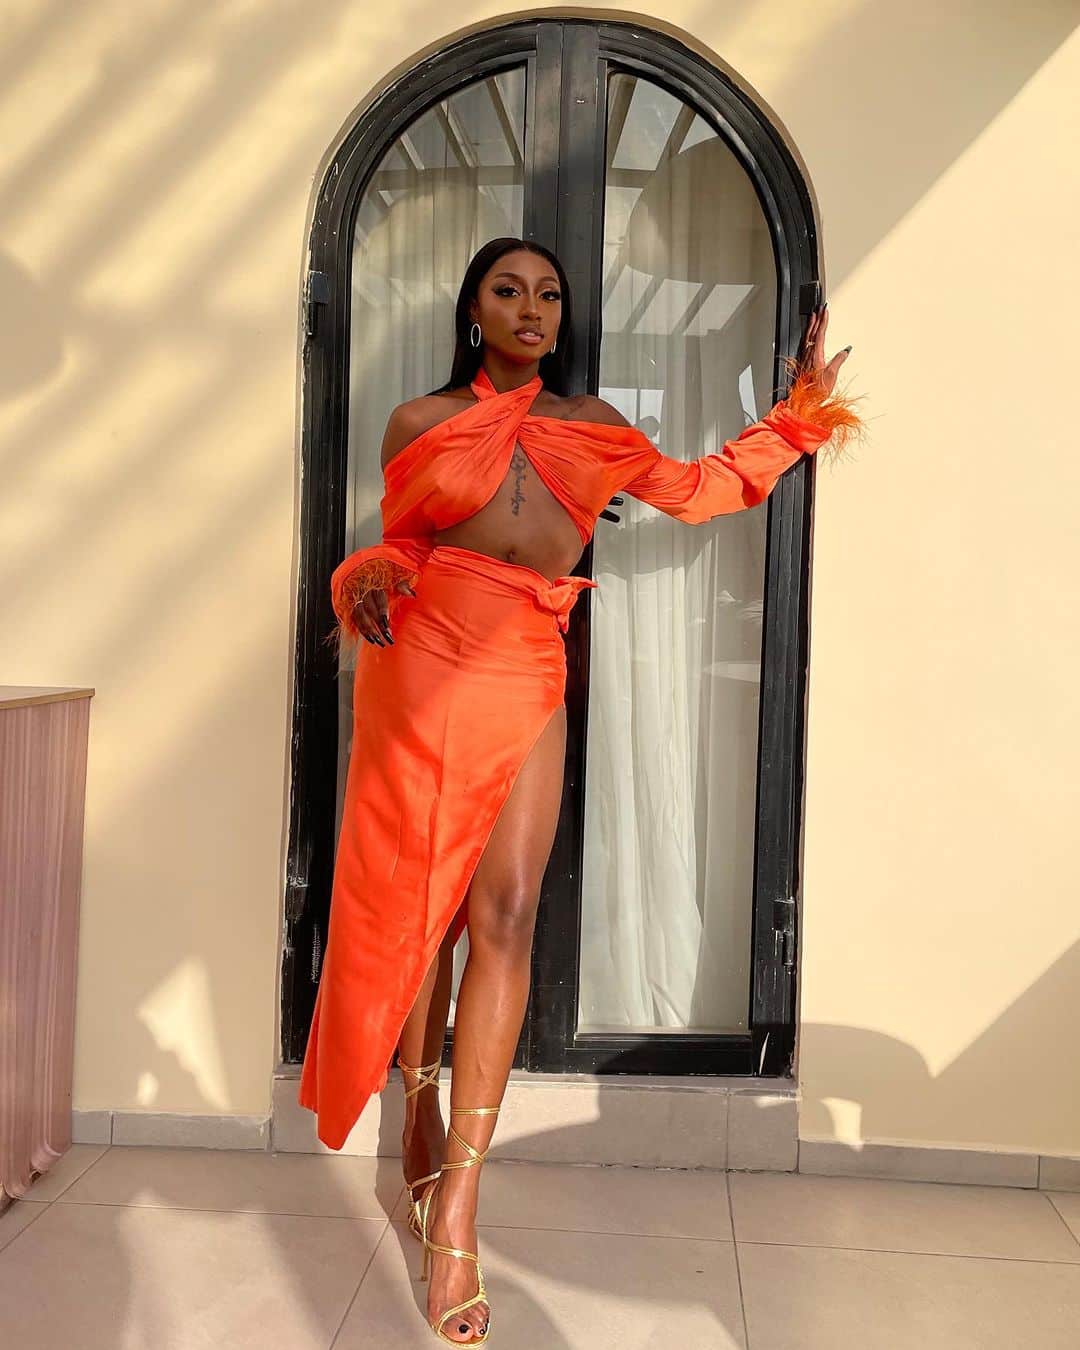 "CeeC is a really sweet girl, but she sometimes makes things up in her head" – Doyin